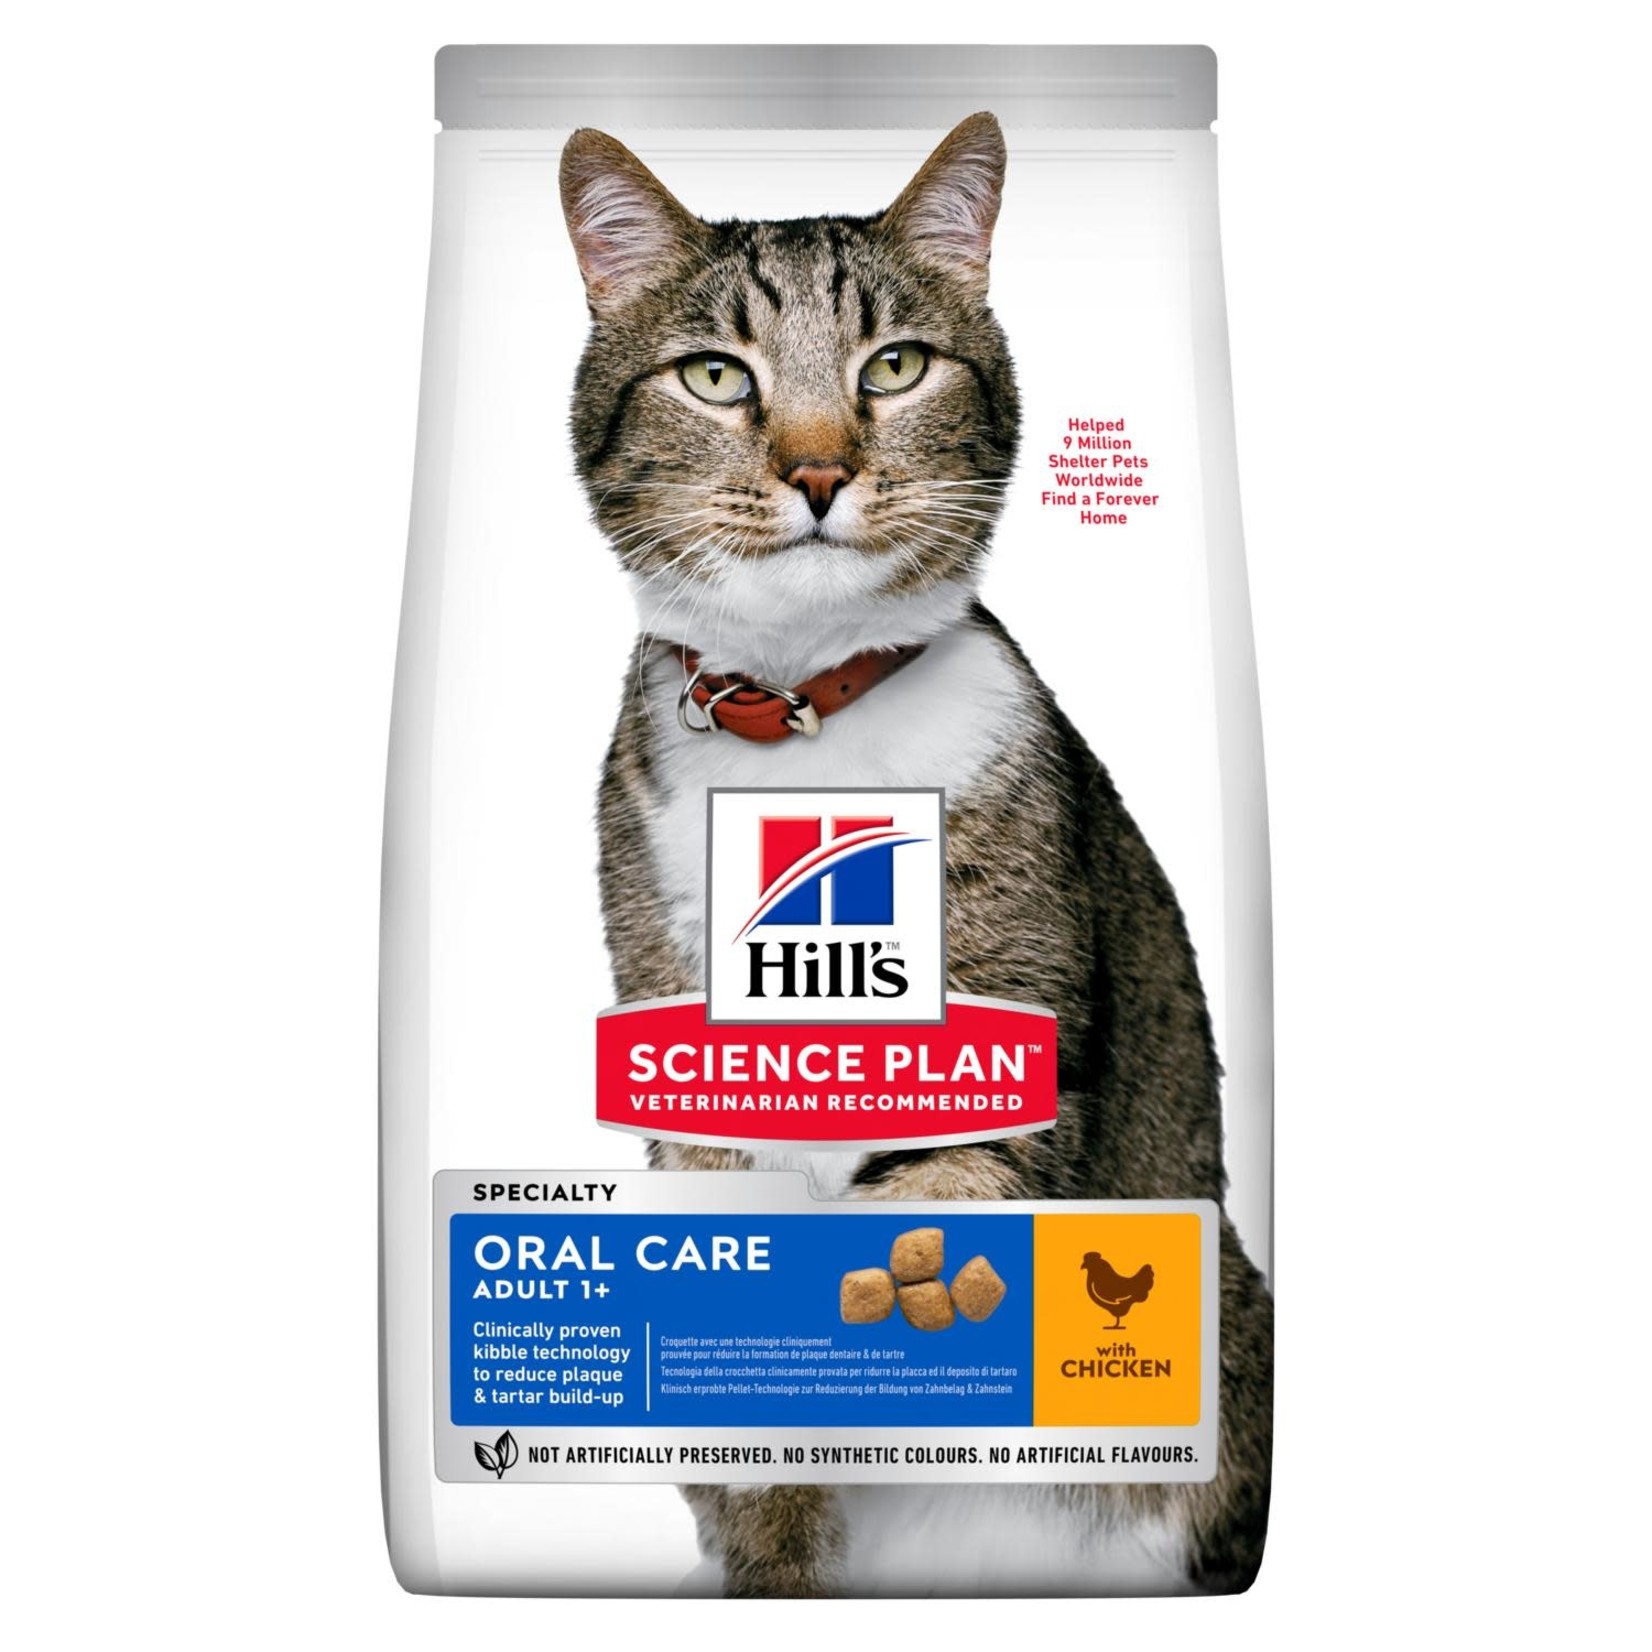 Hill's Science Plan Adult 1+ Oral Care Cat Dry Food, Chicken